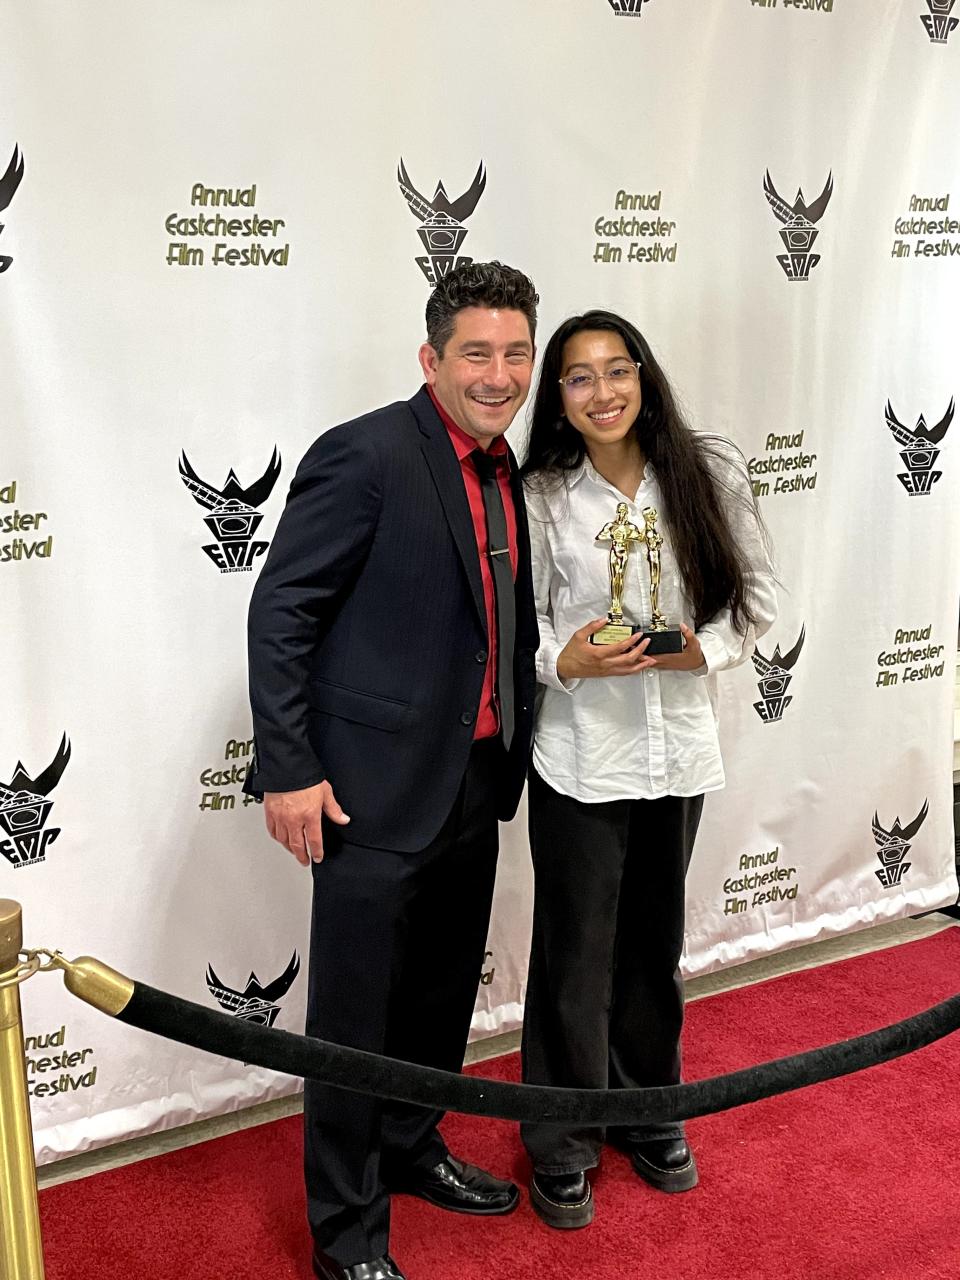 Valentina Quintero, right, with two awards (for Best Film and Best Story) at the 2022 Eastchester High School Film Festival. She is pictured with Michael Goldstein, an Eastchester High School Film Teacher. Quintero is a senior at Eastchester High School pursuing a film production degree in college.